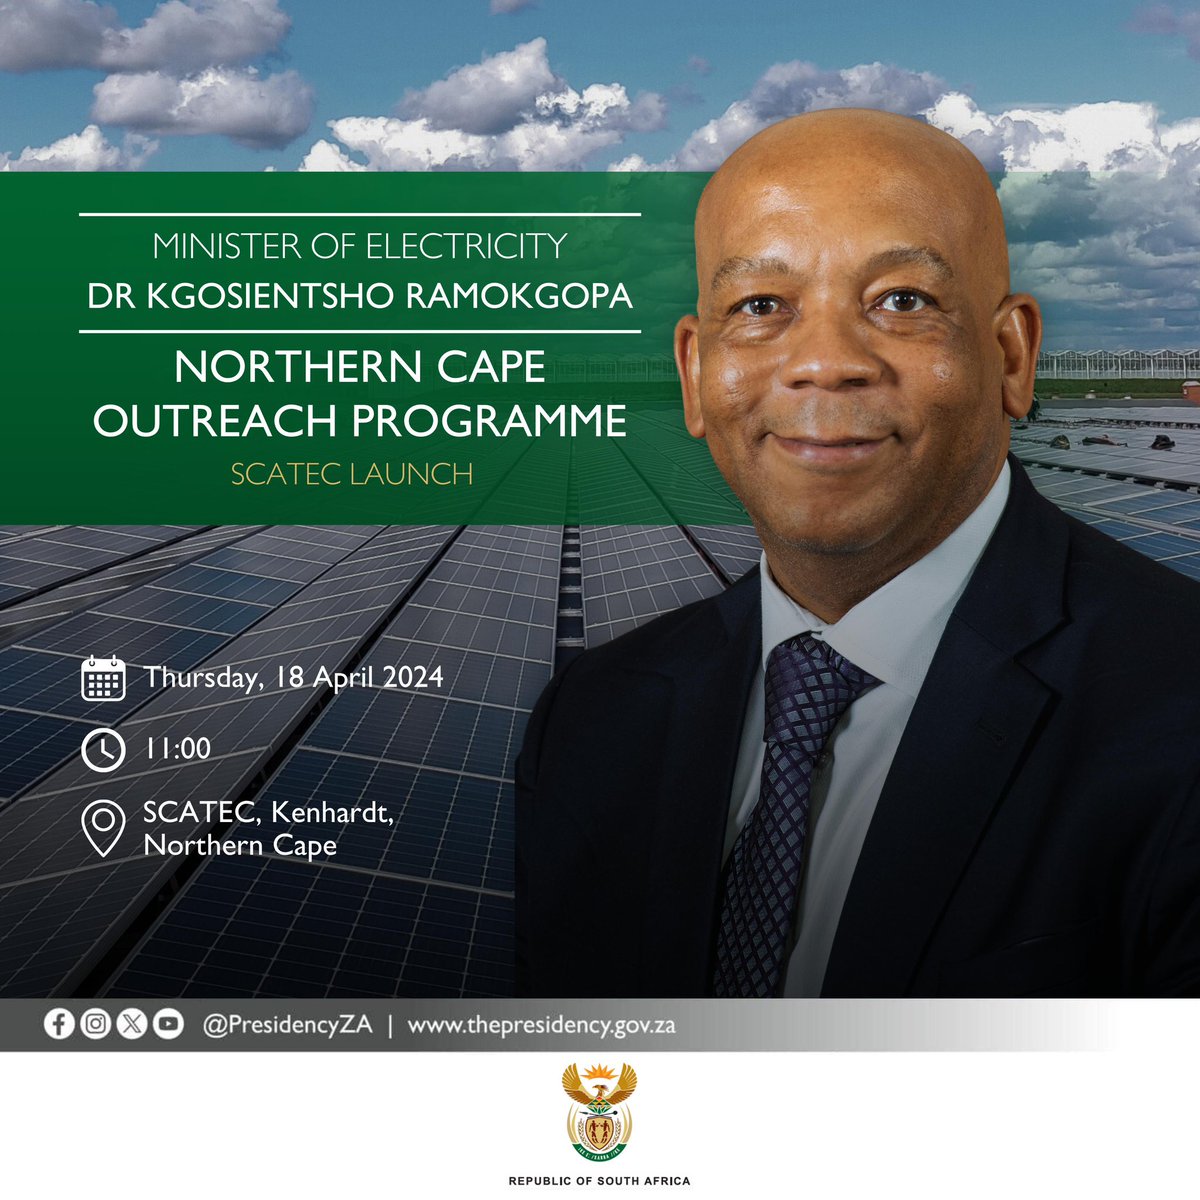 Today we are attending the Scatec Launch joined by the Premier of the Northern Cape, @dr_zsaul1, as part of marking the reaching of commercial operation of one of the largest hybrid solar and energy battery storage facilities. #LeaveNoOneBehind🇿🇦